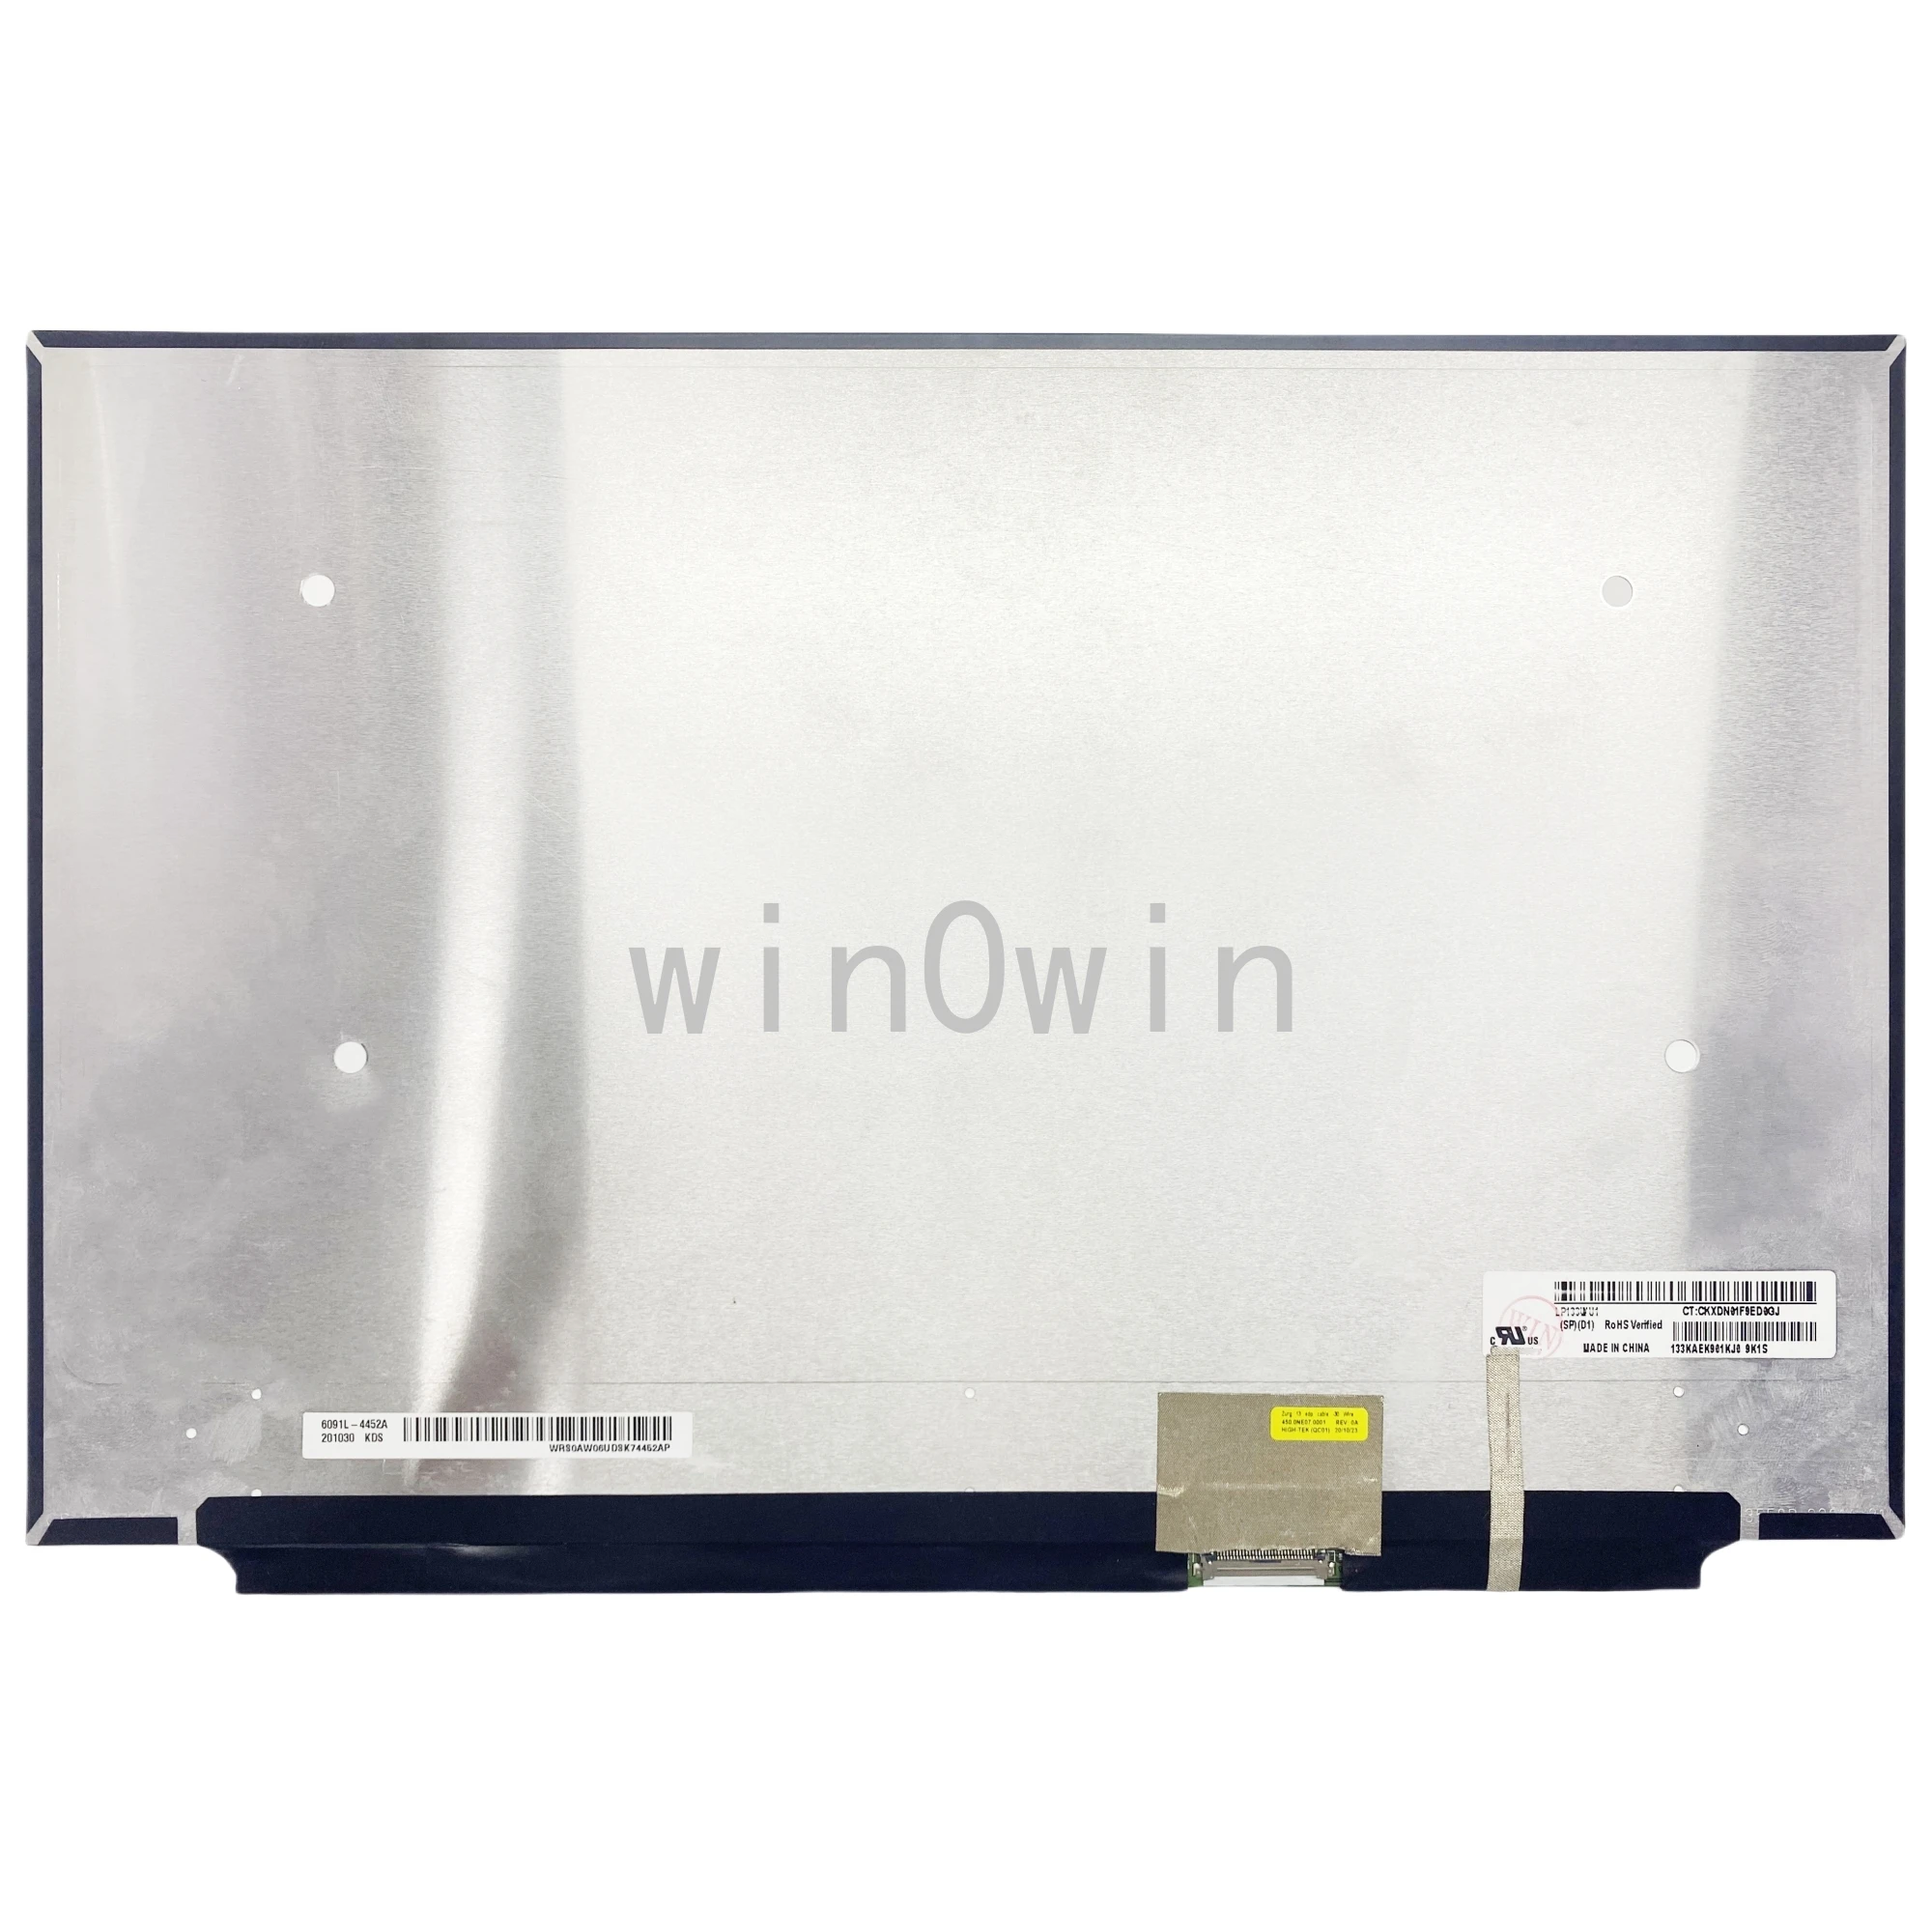 

LP133WU1 SPD1 NV133WUM-N65 B133UAN01.3 LP133WU1 SPD2 LED LCD Screen IPS 1920x1200 30pins Laptop Display Panel Slim For HP 13-be